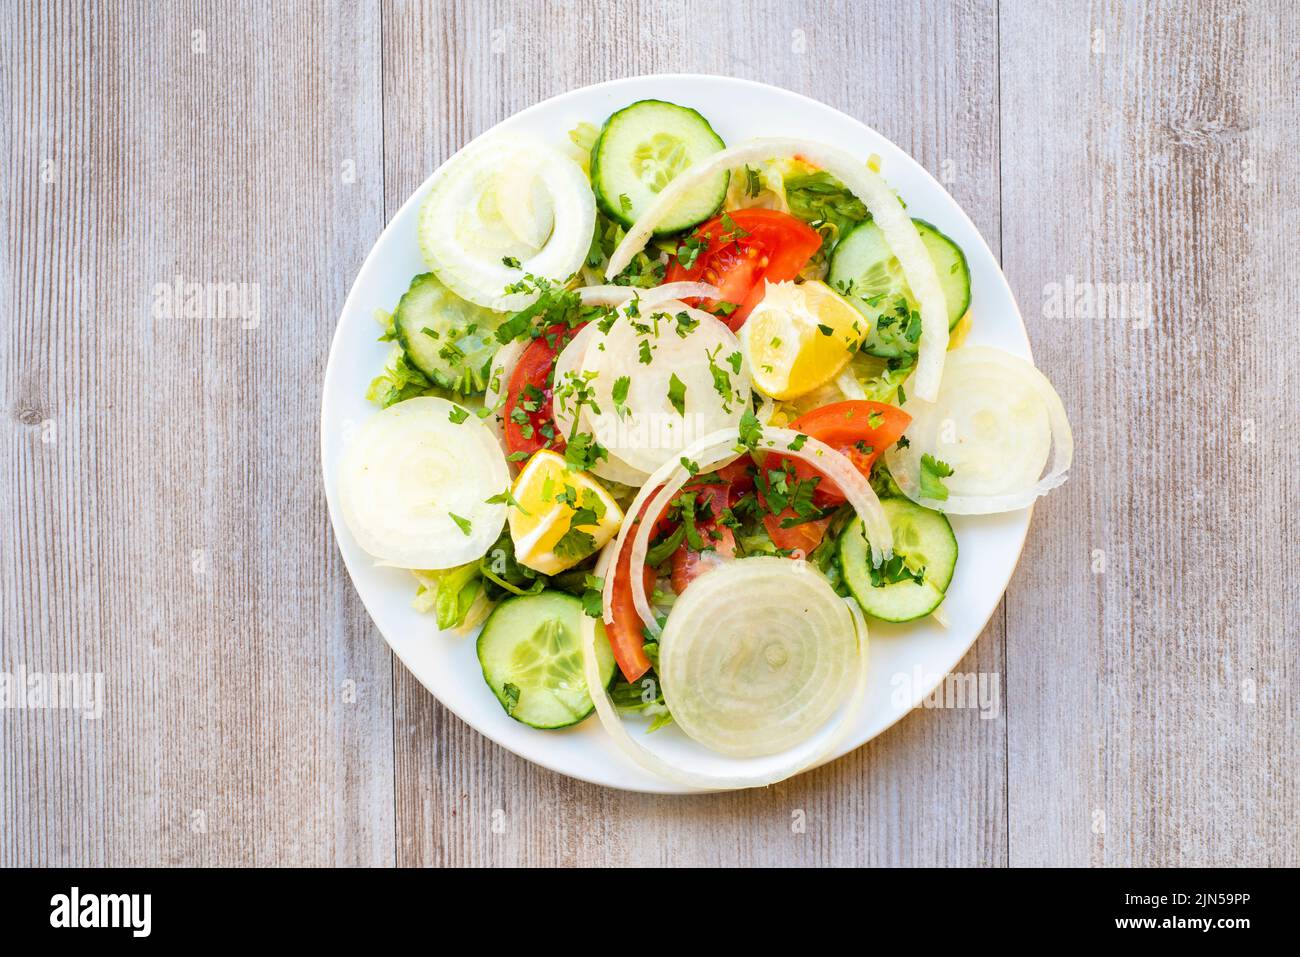 Doncaster, UK - 2019 Mar 21: Green Salad with lettuce, cucumber, onion and tomato from Goa Indian Stock Photo